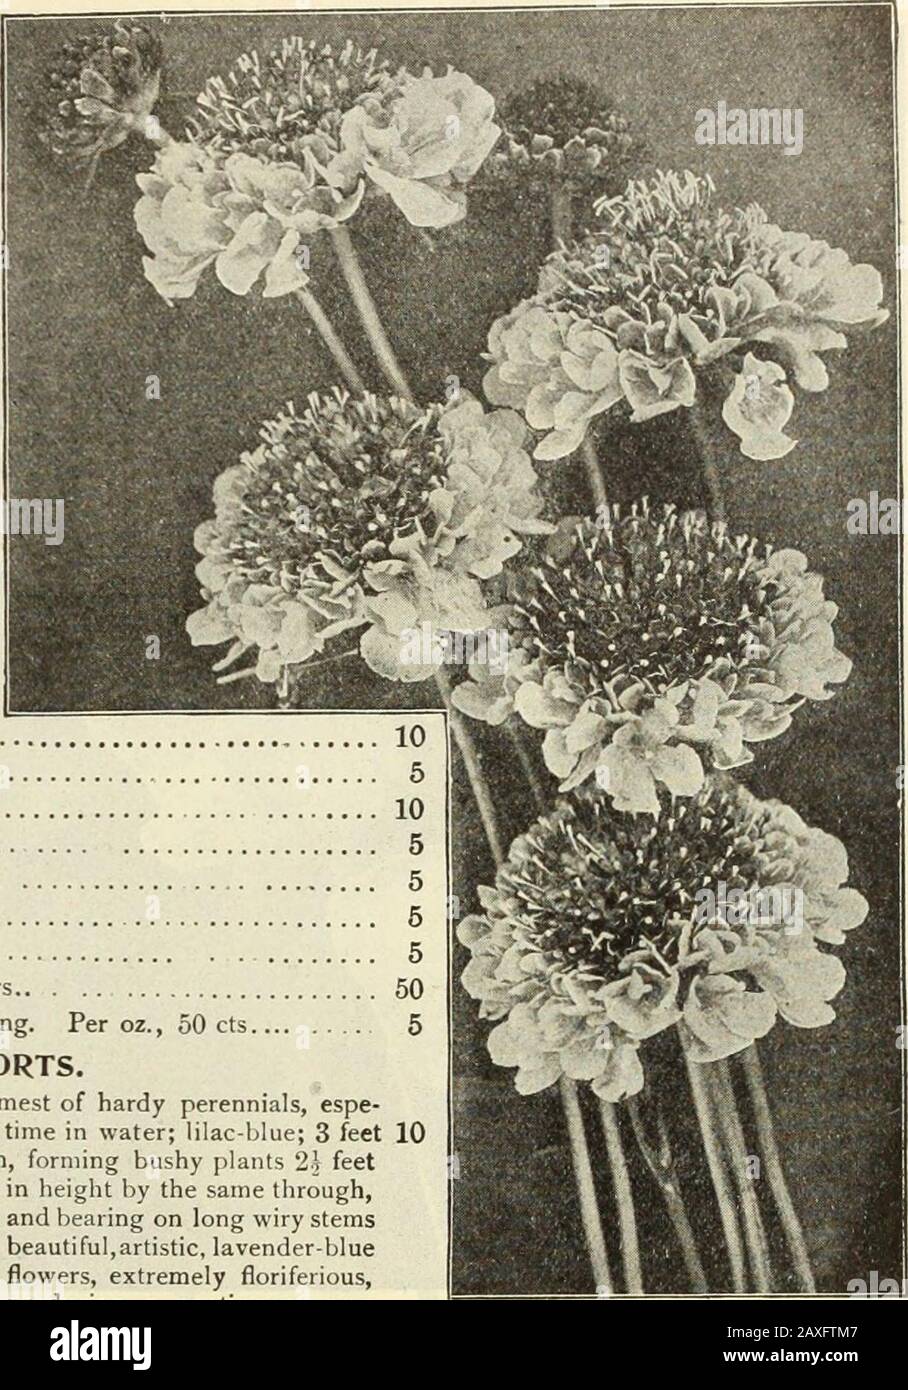 Dreer's garden book : seventy-fourth annual edition 1912 . Improved Large-ploweking Scabiosas. SCHIZANTHCS DWARP Largb-flowered. SCmZANTHUS. (Butterfly or Fringe Flower.) This is one of the airiest and daintiest flowers imaginable, especiallyadapted to bordering beds of taller flowers and those of a heavier growth.The seeds germinate quickly and come into bloom in a few weeks fromsowing. The florescence is such as to completely obscure the foliage, mak-ing the plants a verital)le pyramid of the most delicate and charming bloomIf a continuous show of bloom is desired, it will be well to make so Stock Photo